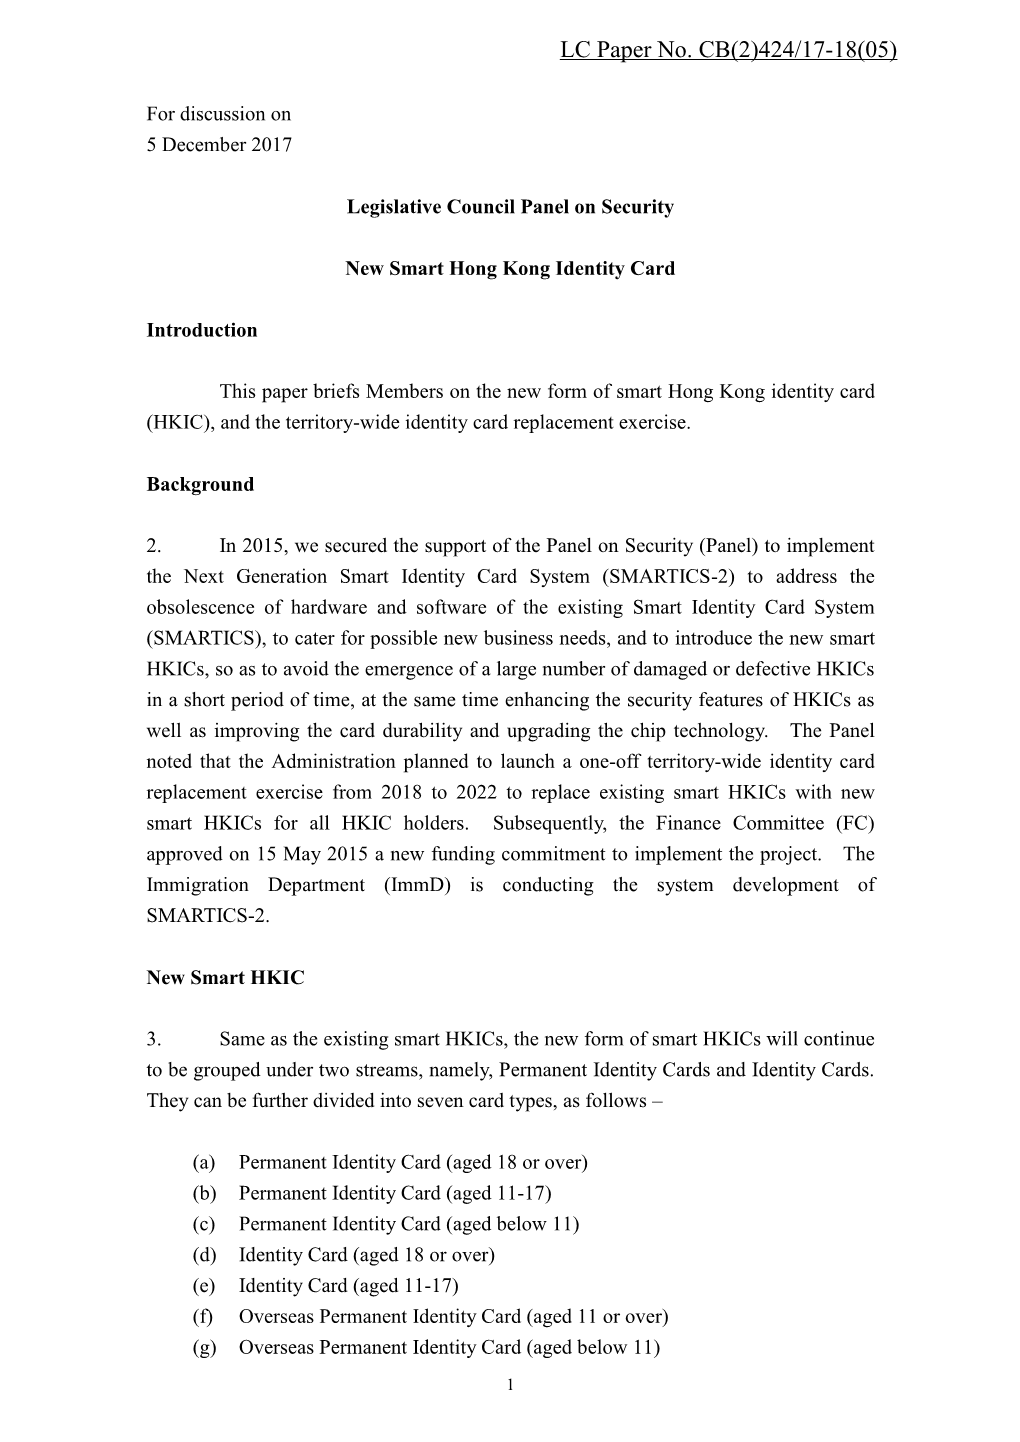 Administration's Paper on New Smart Hong Kong Identity Card